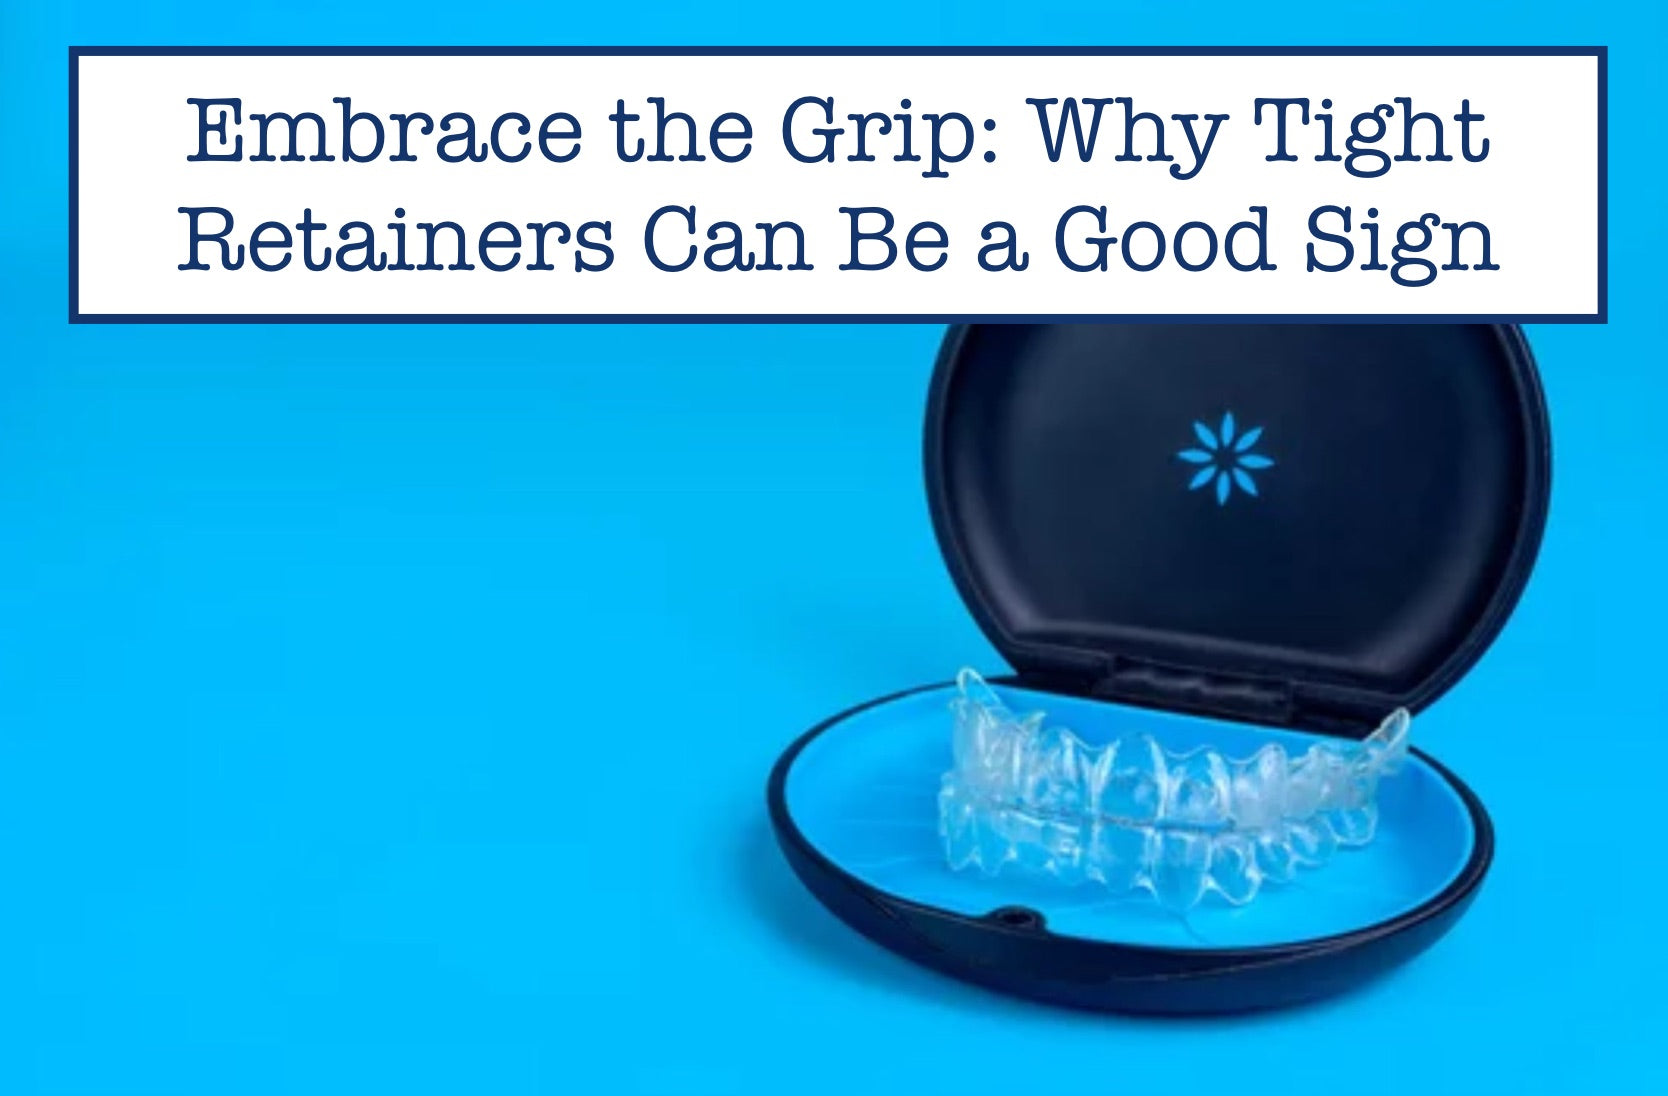 Embrace the Grip: Why Tight Retainers Can Be a Good Sign